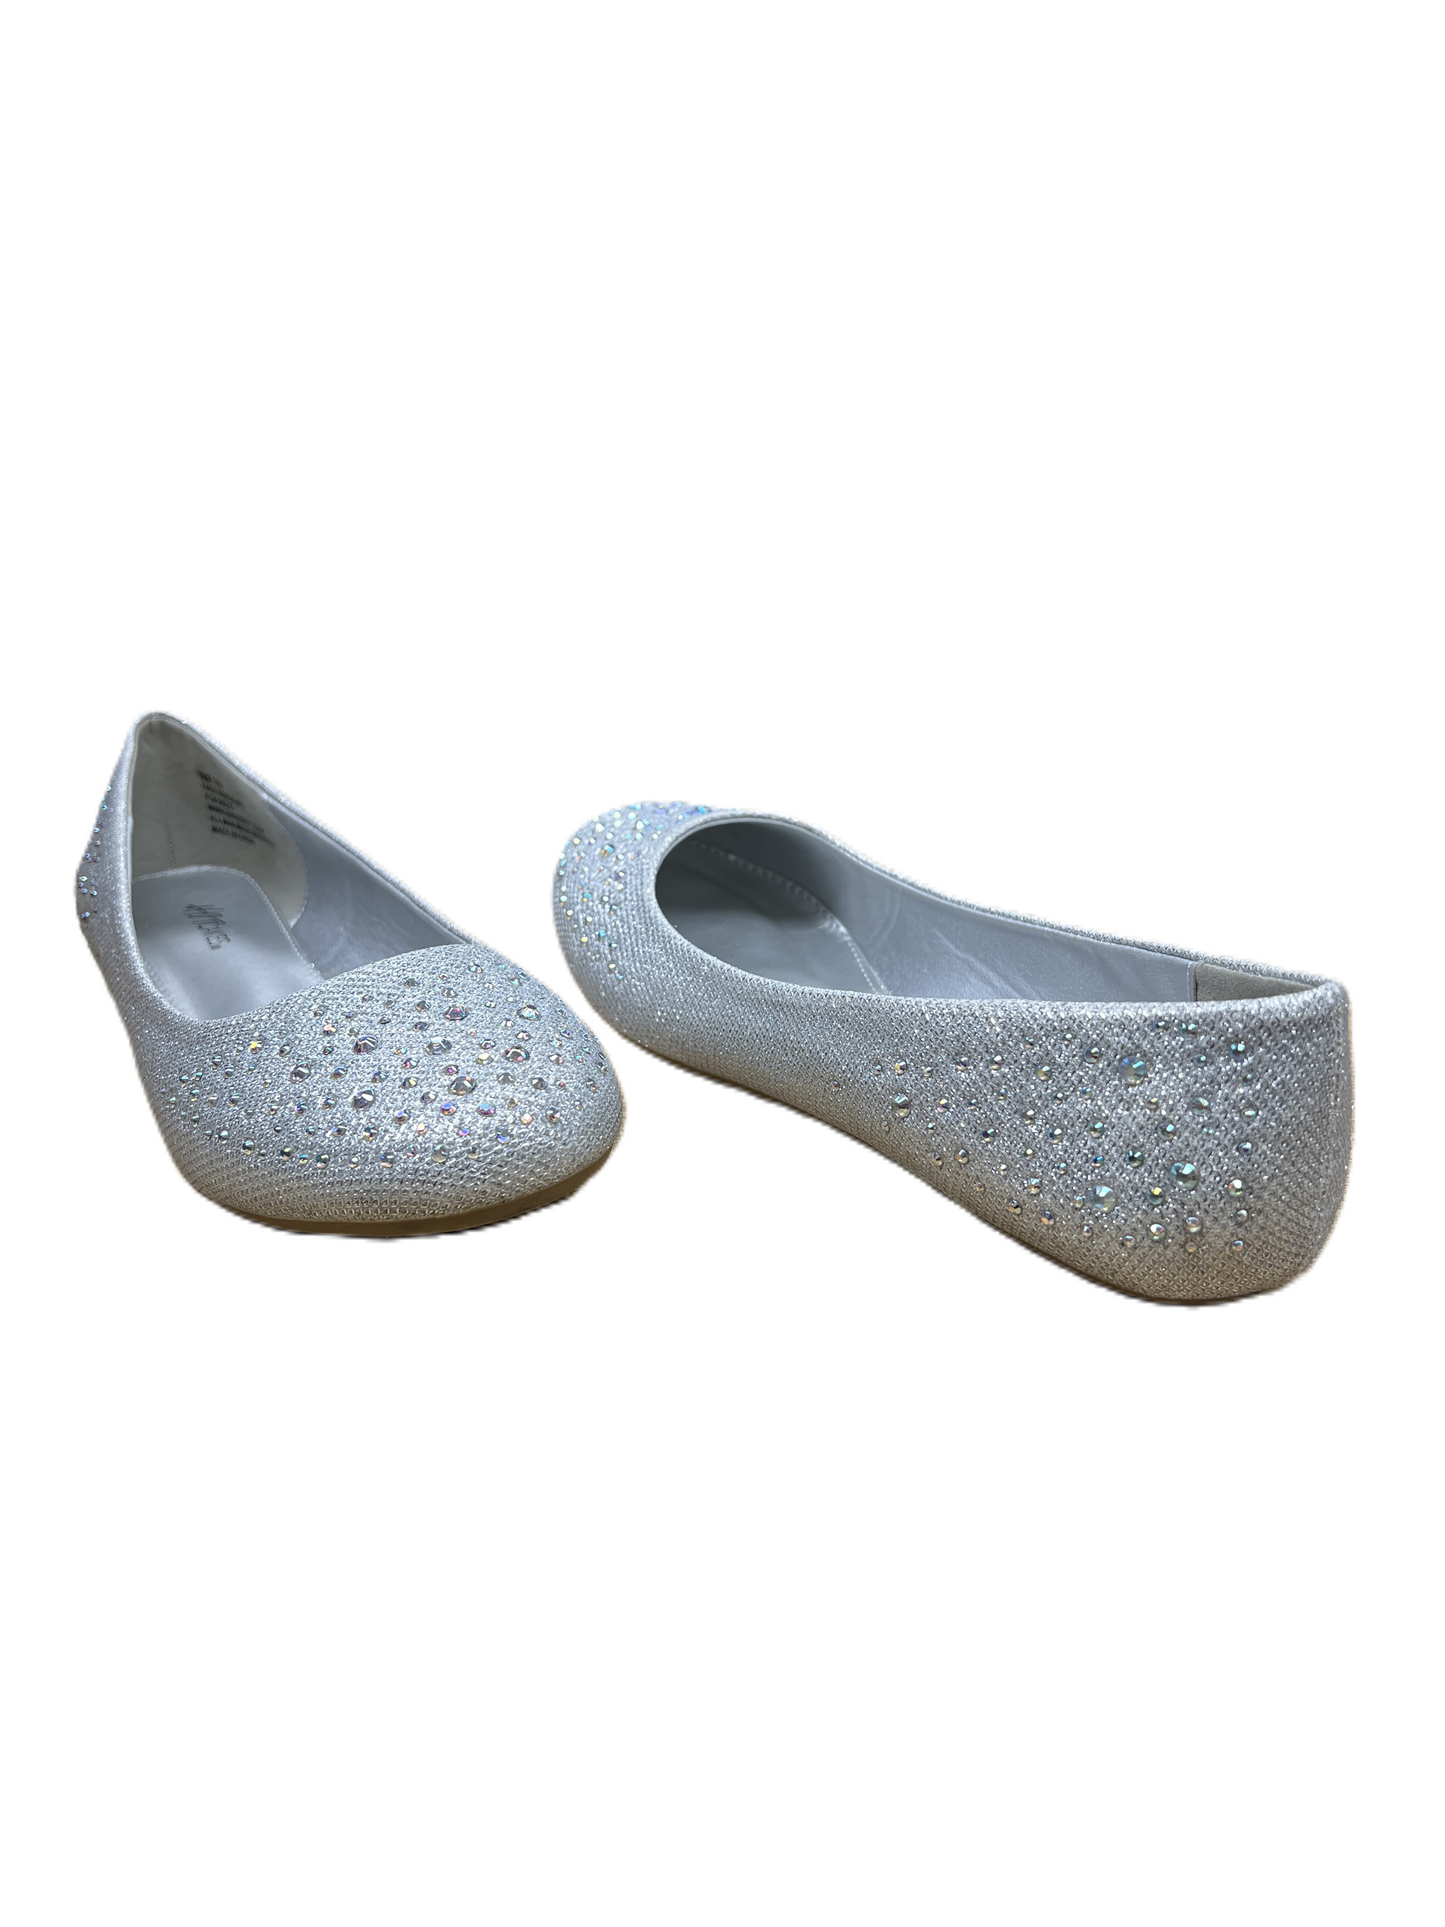 Shoes Flats Ballet By HOTCAKES  Size: 10